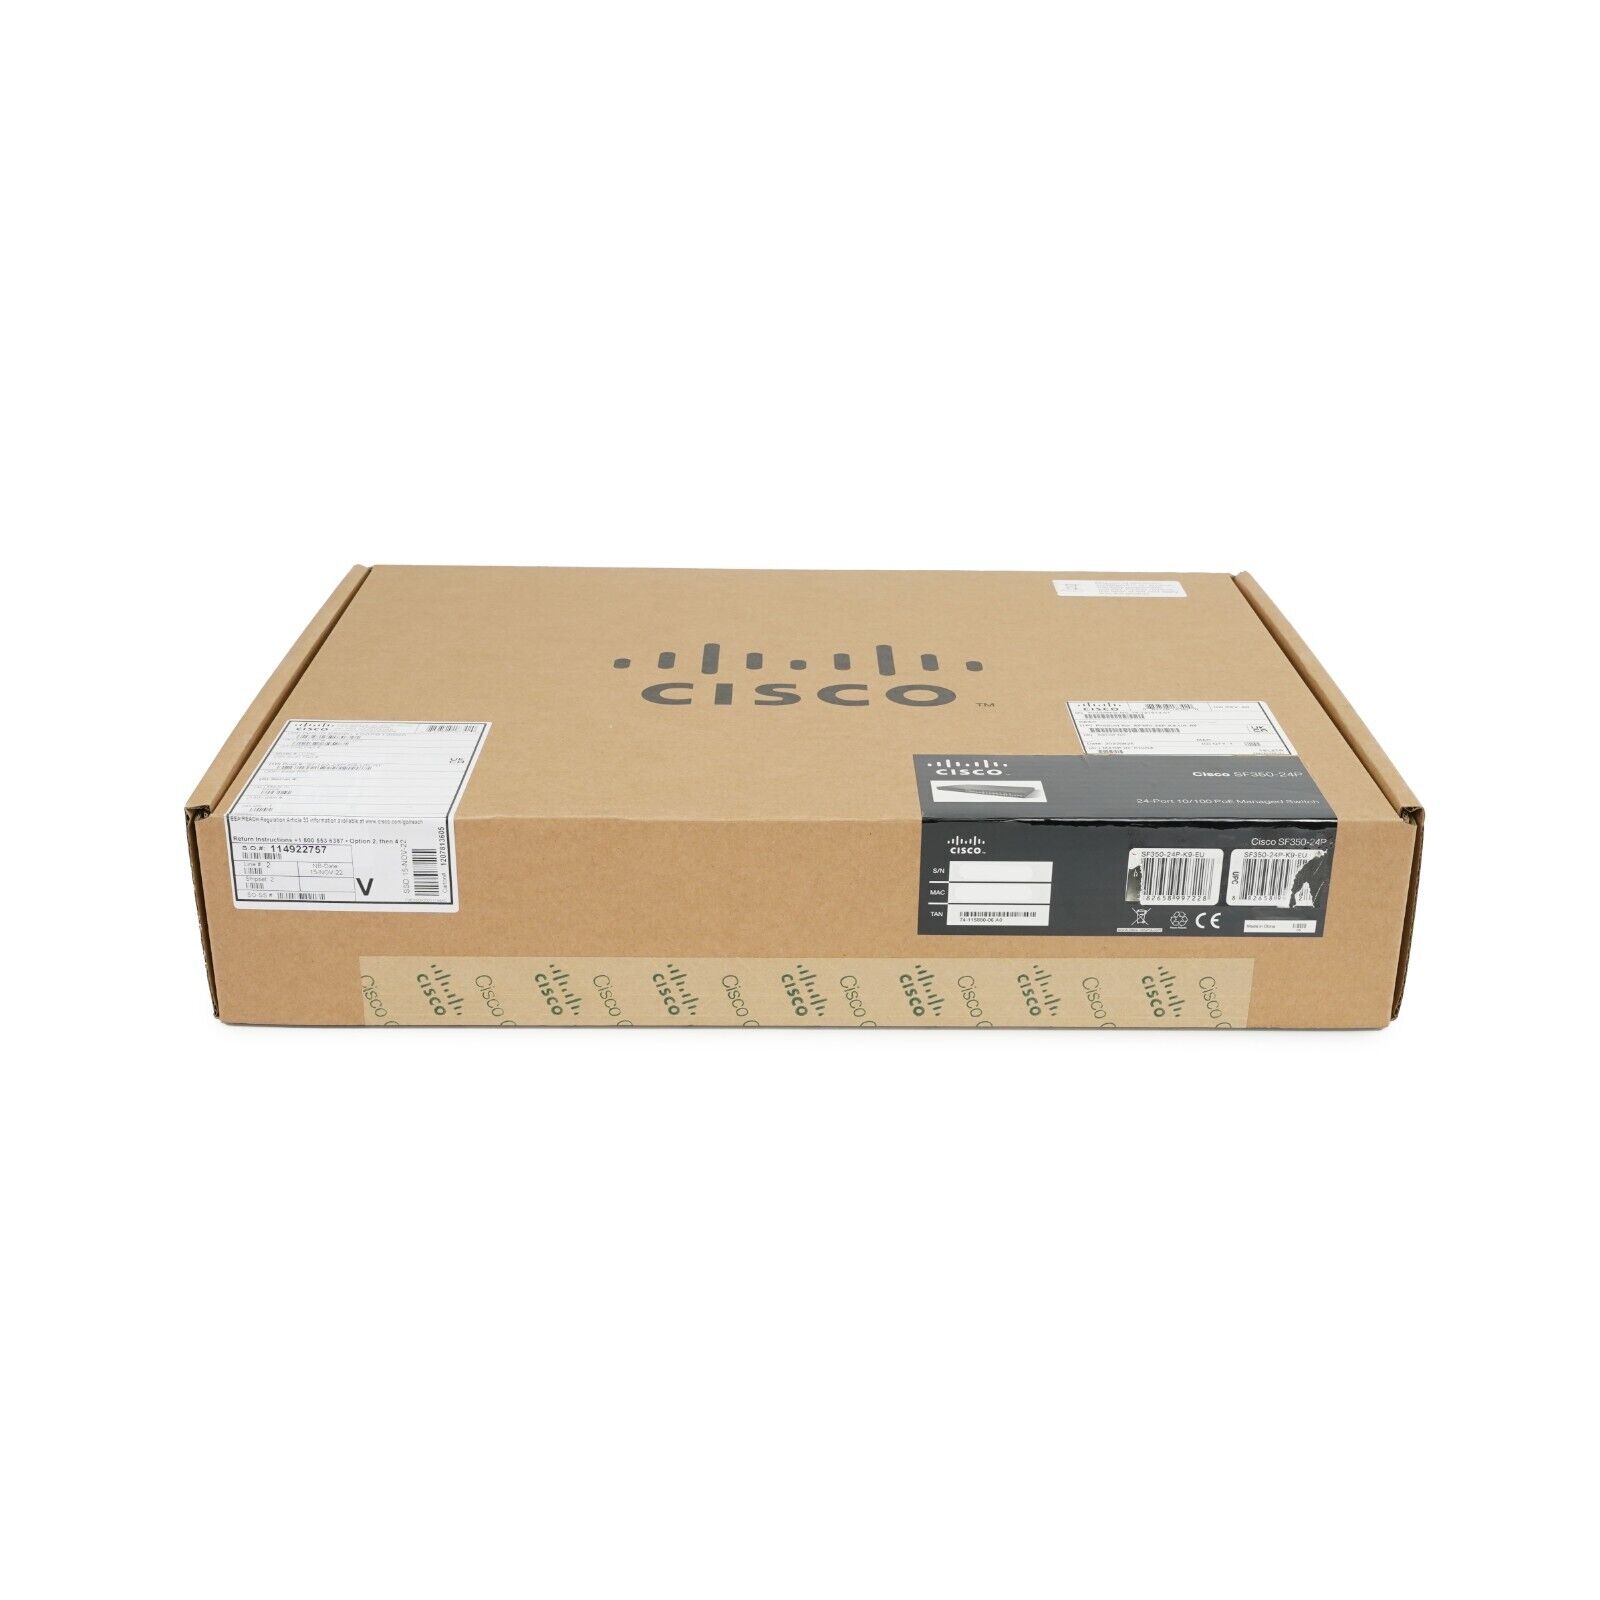 Cisco Small Business SF350 Managed 24-Port PoE Switch SF350-24P-K9